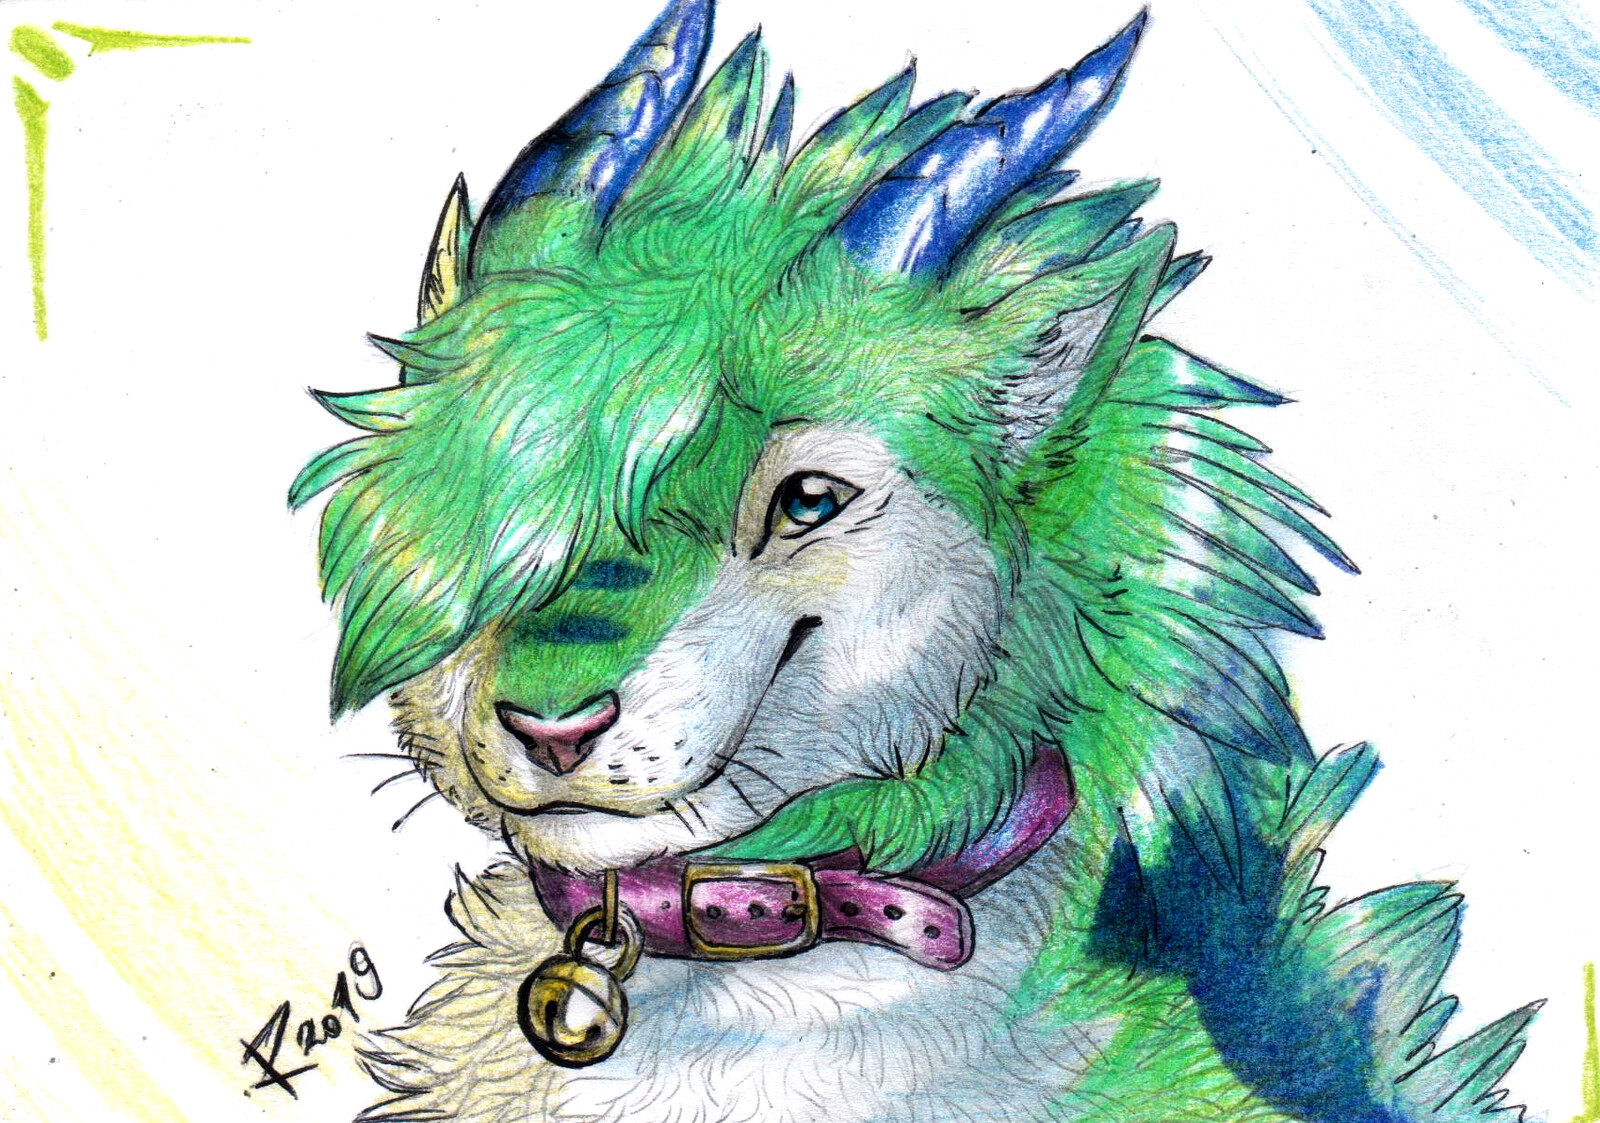 Artfight revenge! Fury, a character that belongs to Silvahrush. Drawn with colored pencils and ballpoint pen.